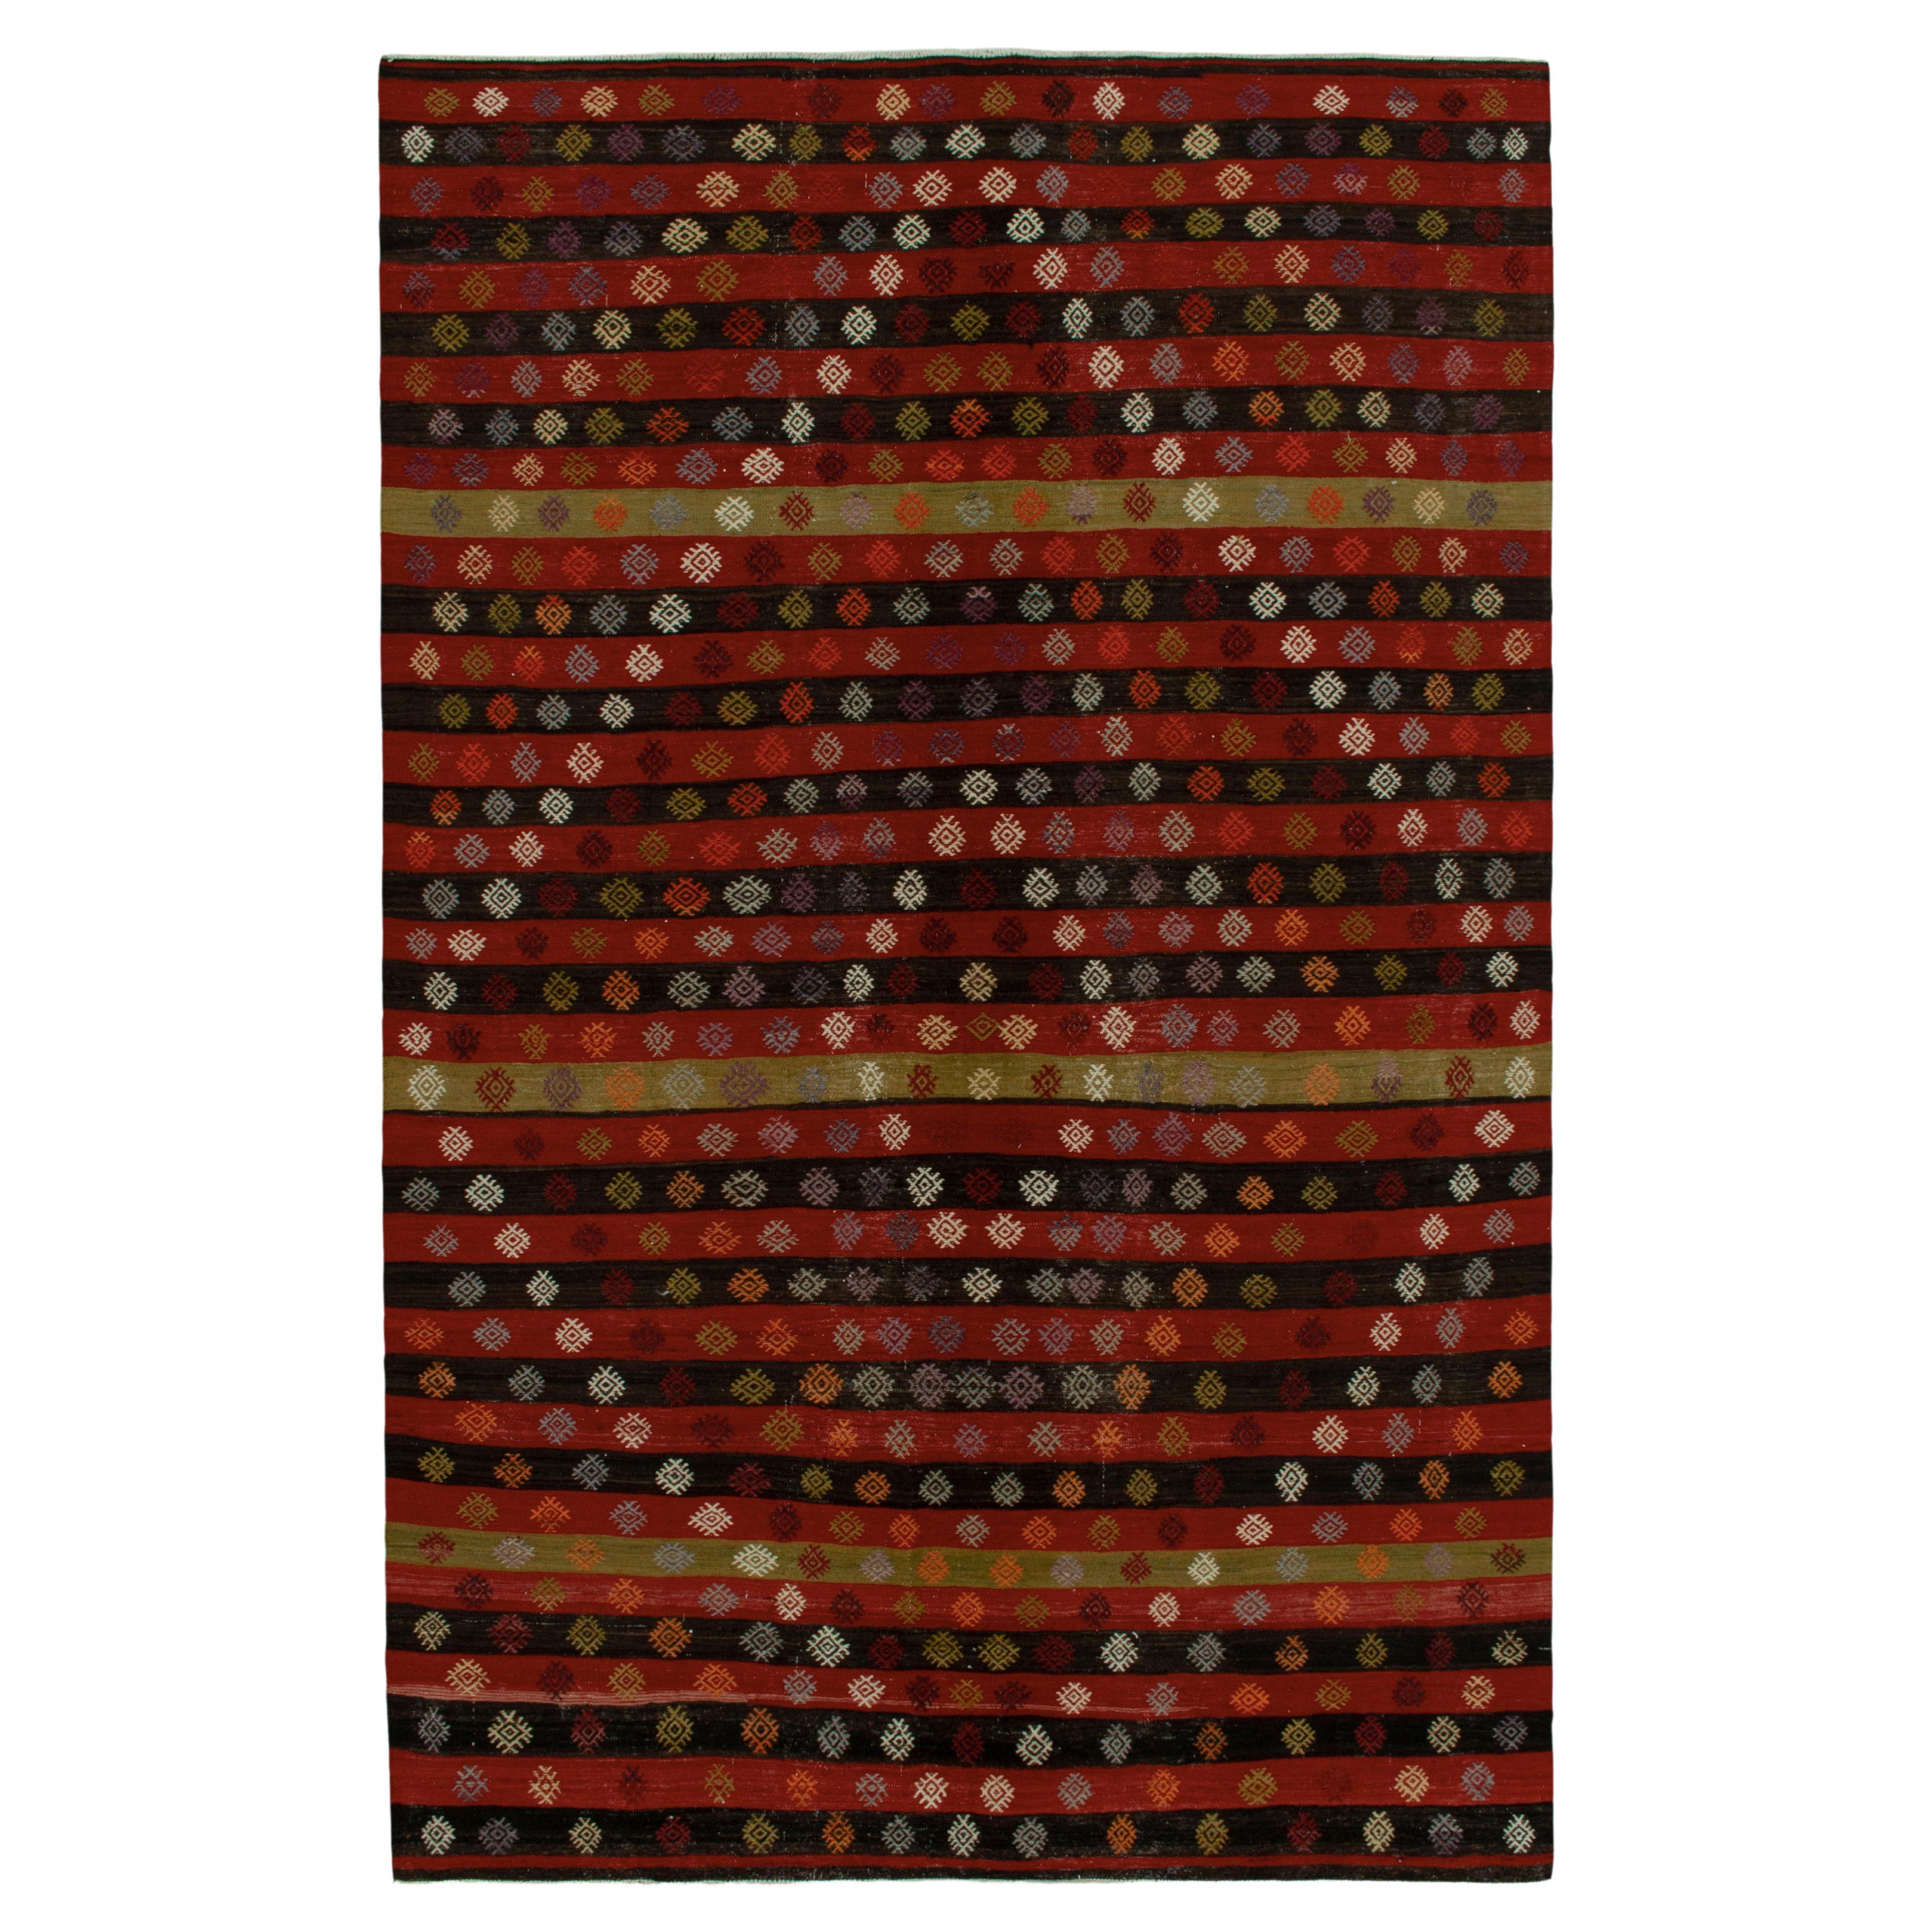 1940s Vintage Turkish Kilim in Red, White Geometric Patterns by Rug & Kilim For Sale